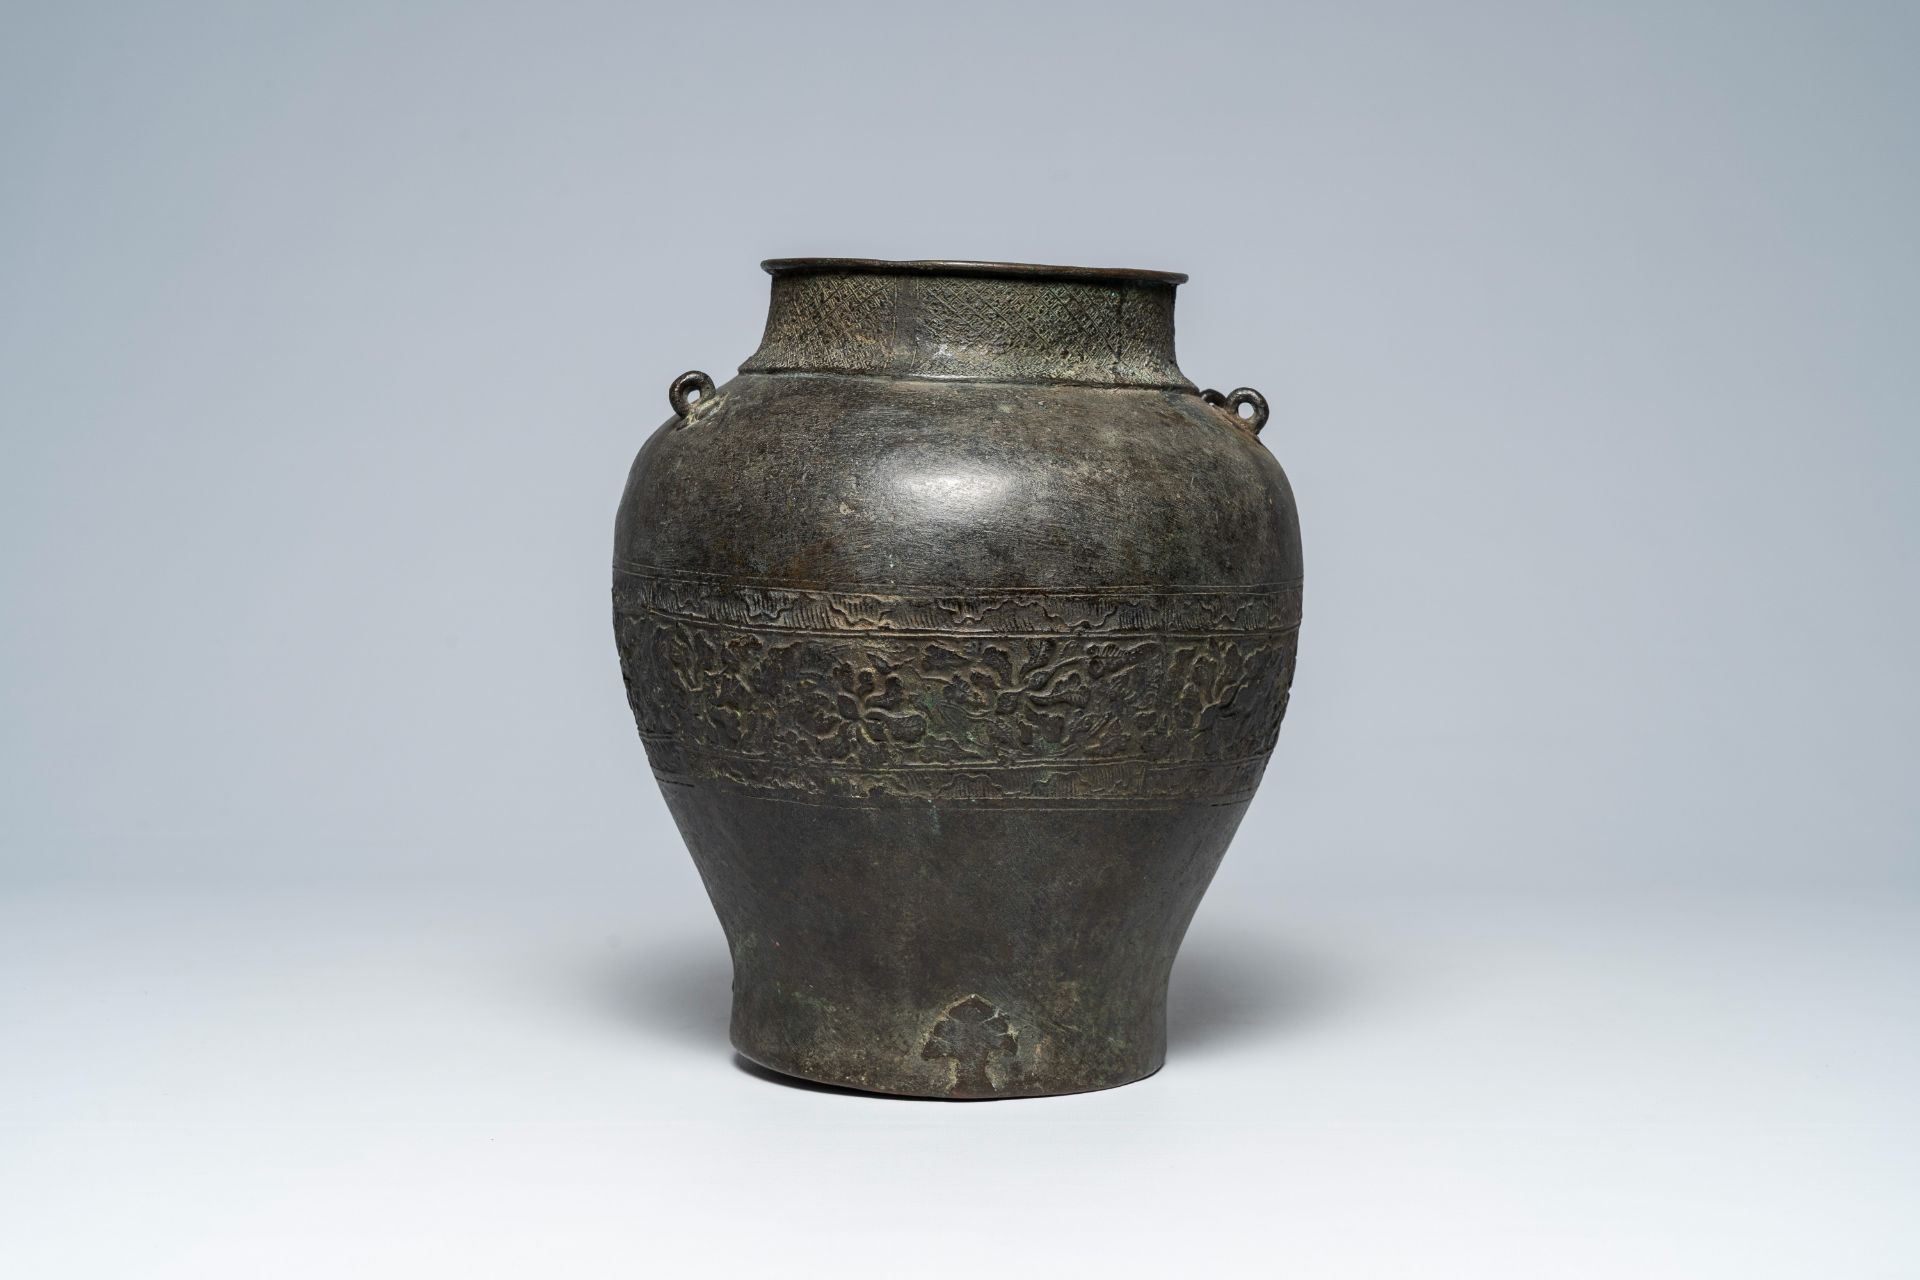 A Japanese or Korean bronze vase with floral relief frieze, probably 17th/18th C. - Image 3 of 6